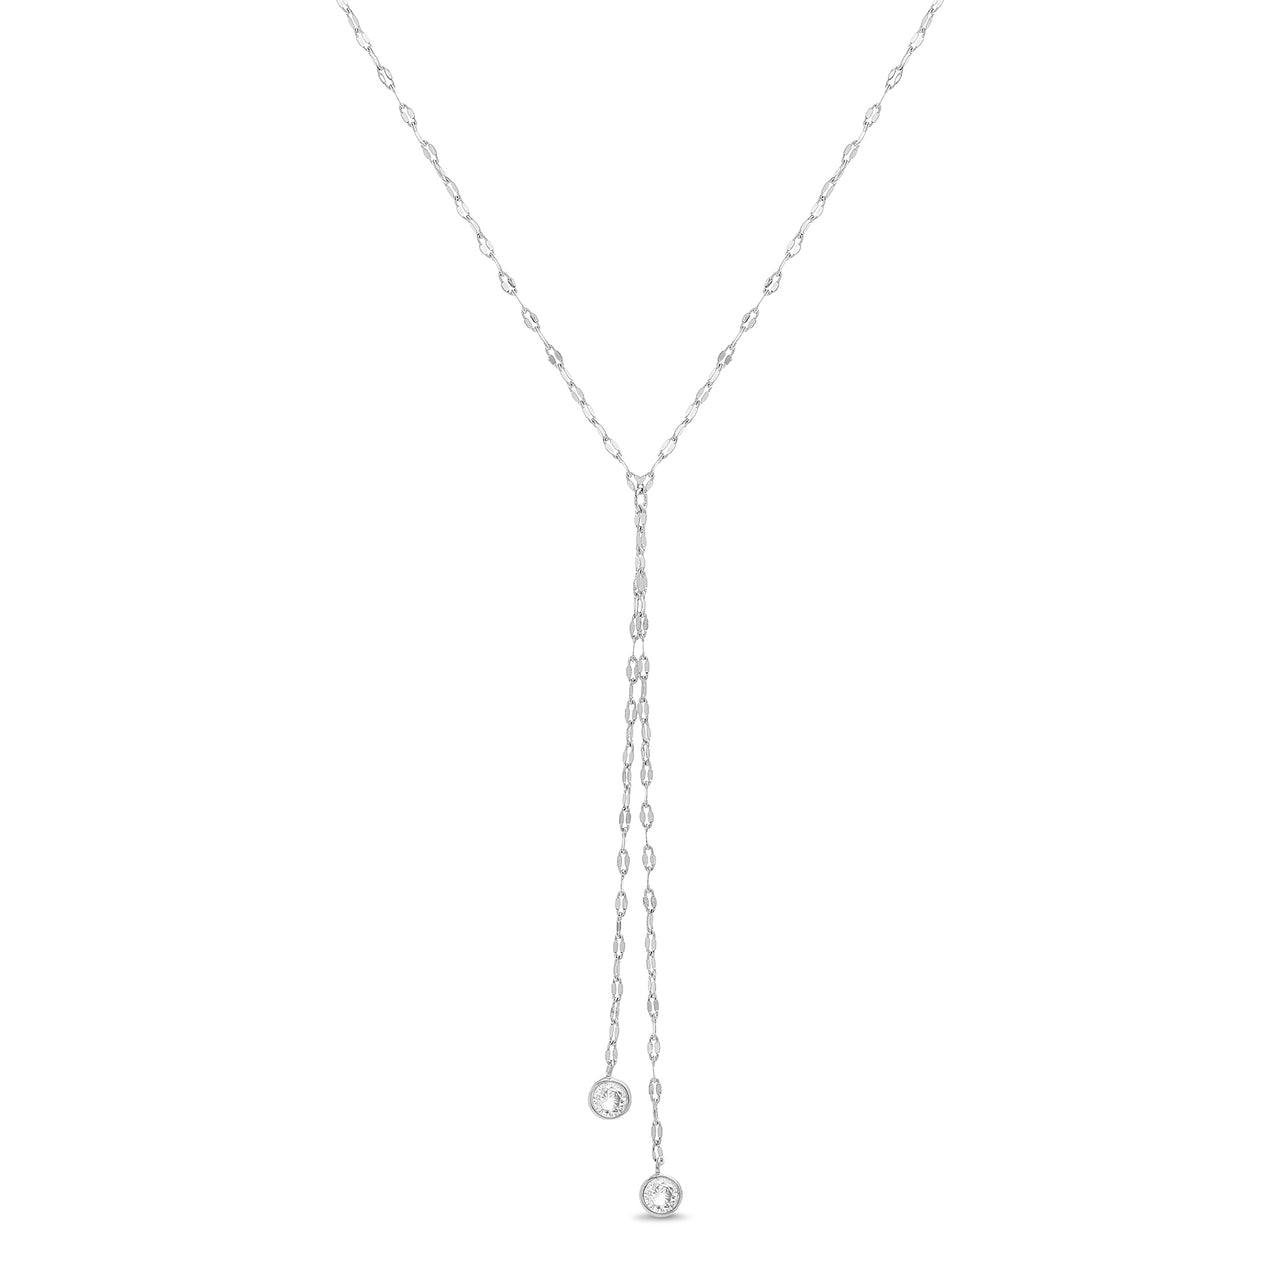 Lesa Michele Cubic Zirconia Kiss Chain Double Dangle Necklace in Rhodium Plated Sterling Silver